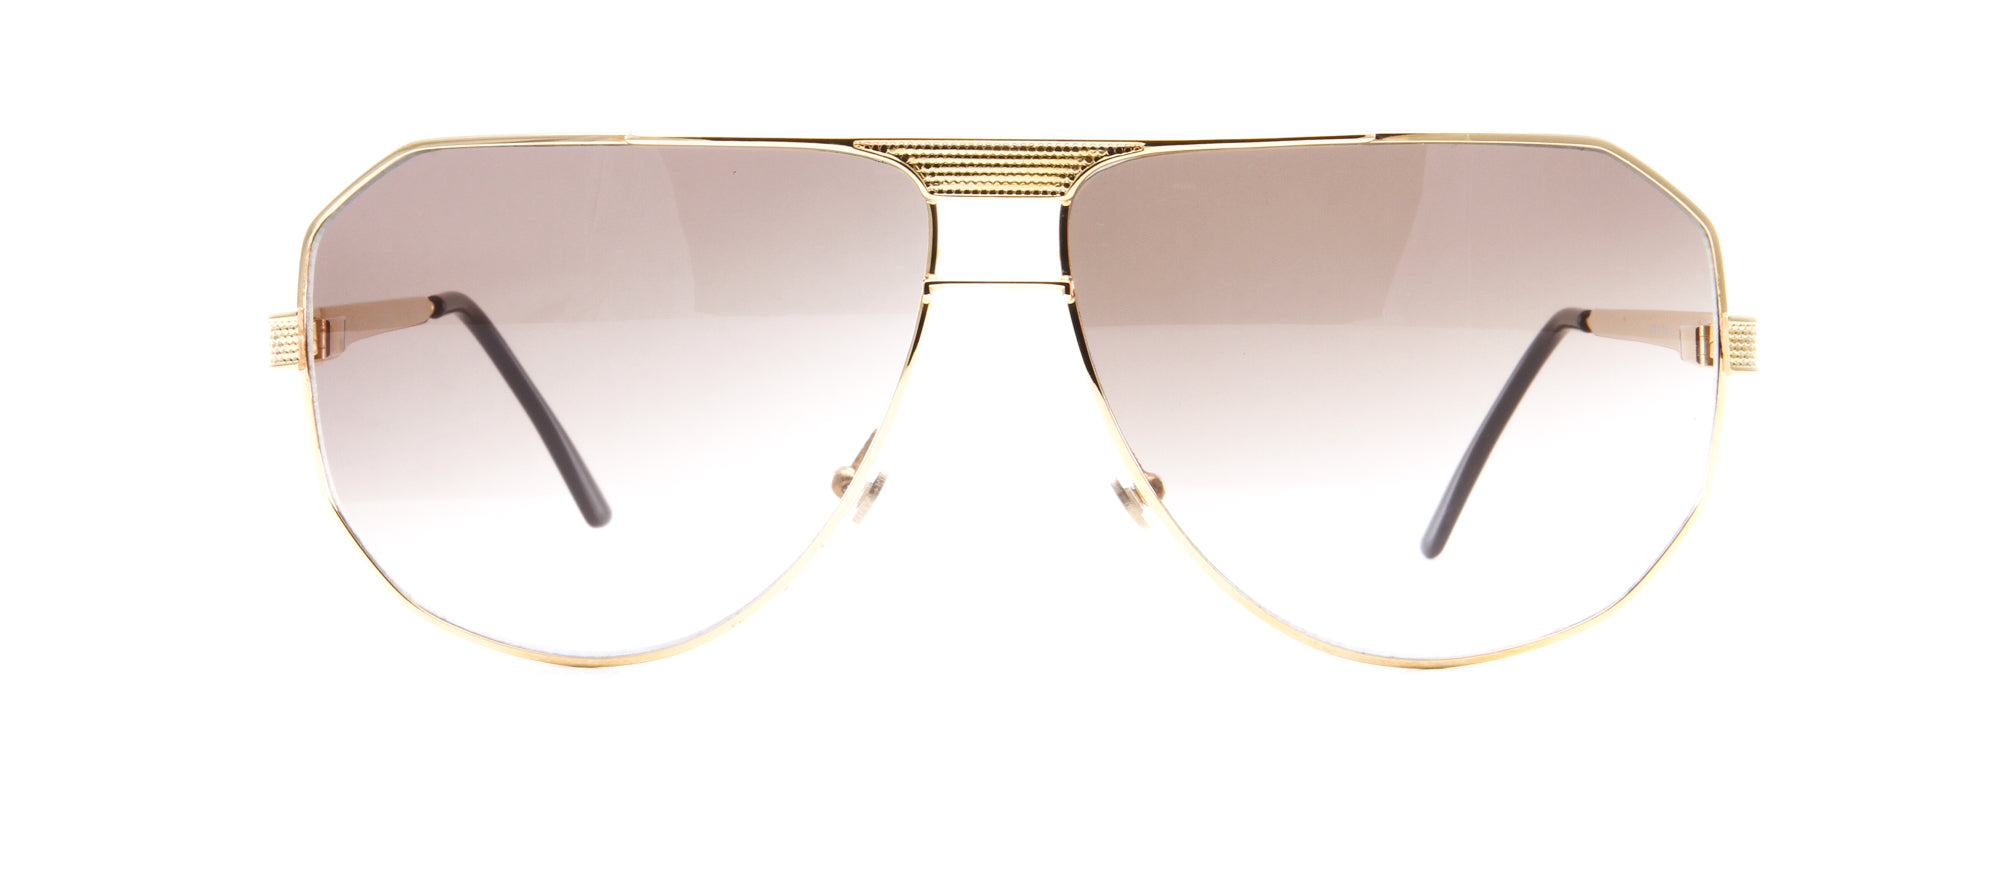 Chopard Sunglasses SCHG37 08FF - Best Price and Available as Prescription  Sunglasses